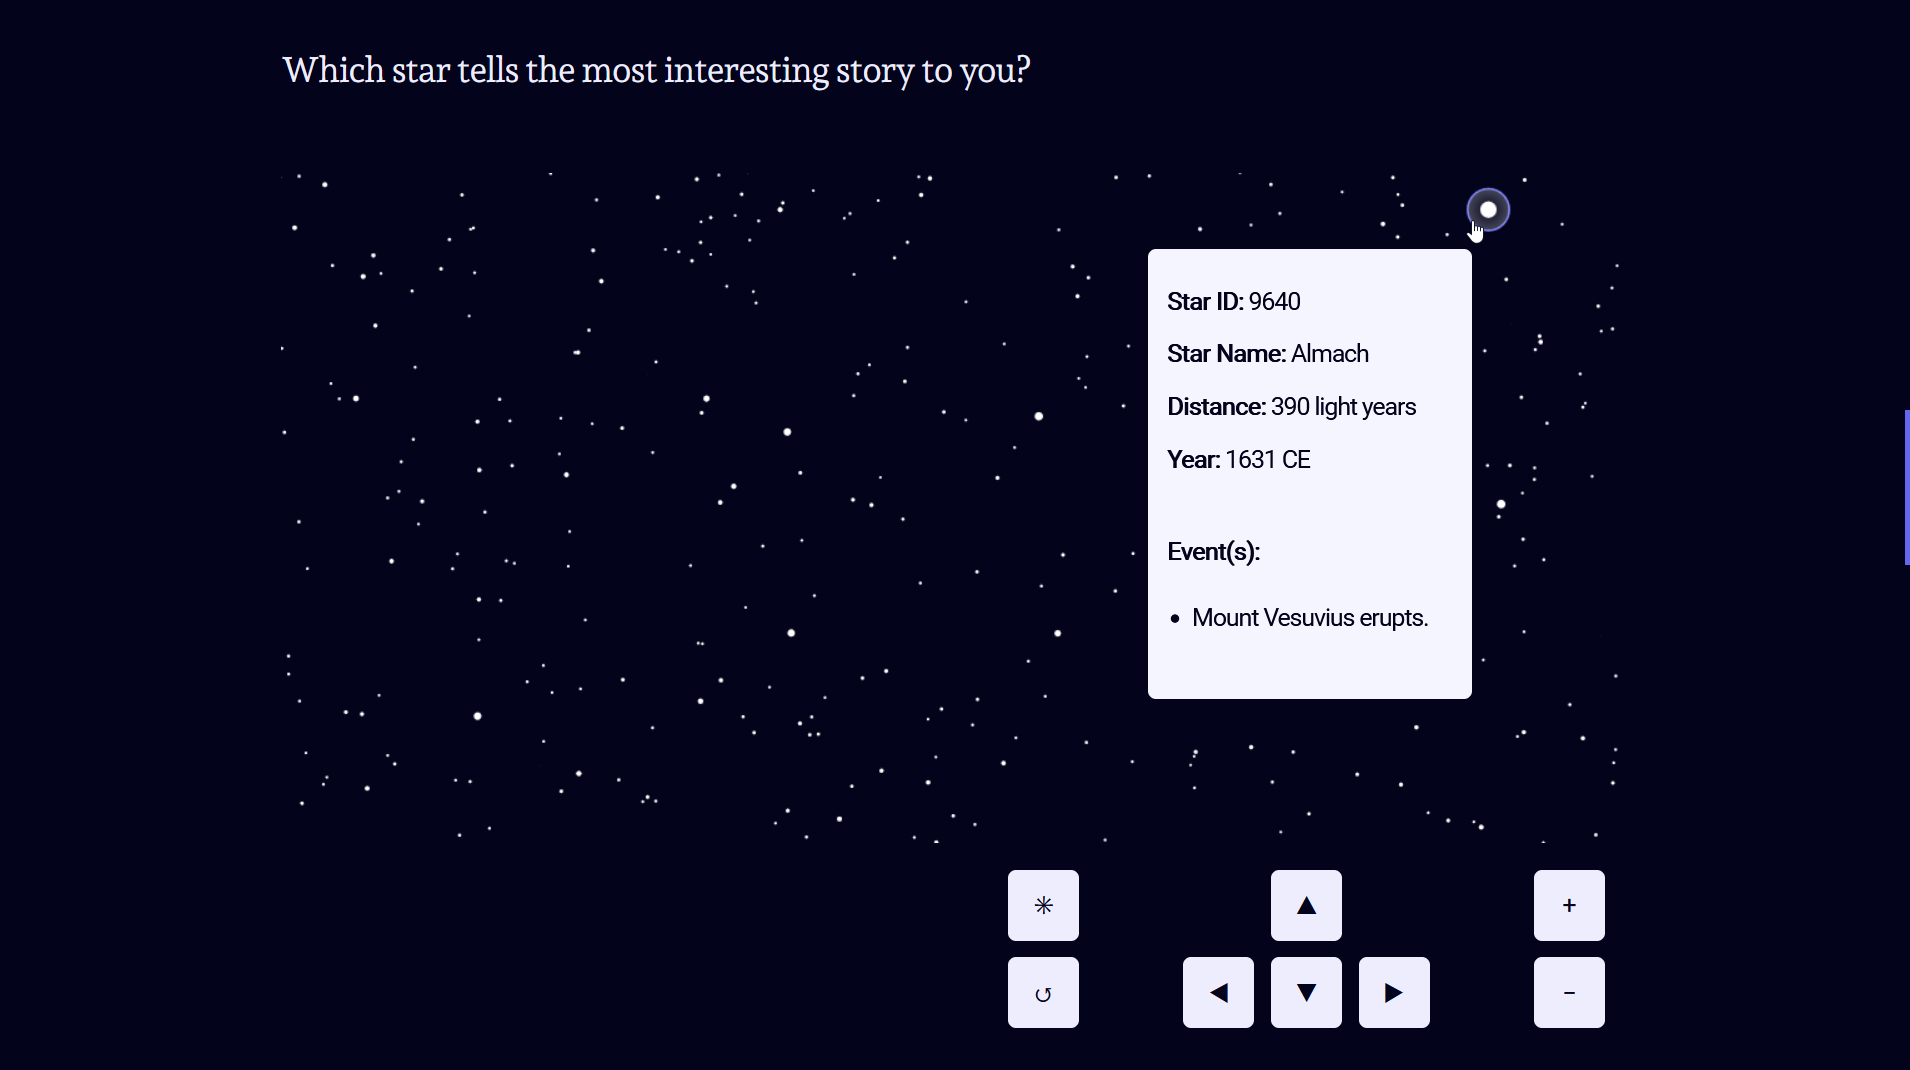 Screenshot of a map of the night sky. On top there is text that reads "Which star tells the most interesting story to you?". The map shows around 50-60 stars, depicted as white circles on a dark blue background. A computer cursor shaped like a hand is hovering one of the stars. This star is enlarged and has a purple outline. Right below the cursor there is a white tooltip textbox that contains information about the hovered star. The information reads as follows. Star ID: 9640. Star Name: Almach. Distance: 390 light years. Year: 1631 CE. Event(s): Mount Vesuvius erupts. Below the map there is a group of buttons that include arrow buttons for all directions, zoom-buttons, a reset button and a button with a star-symbol.